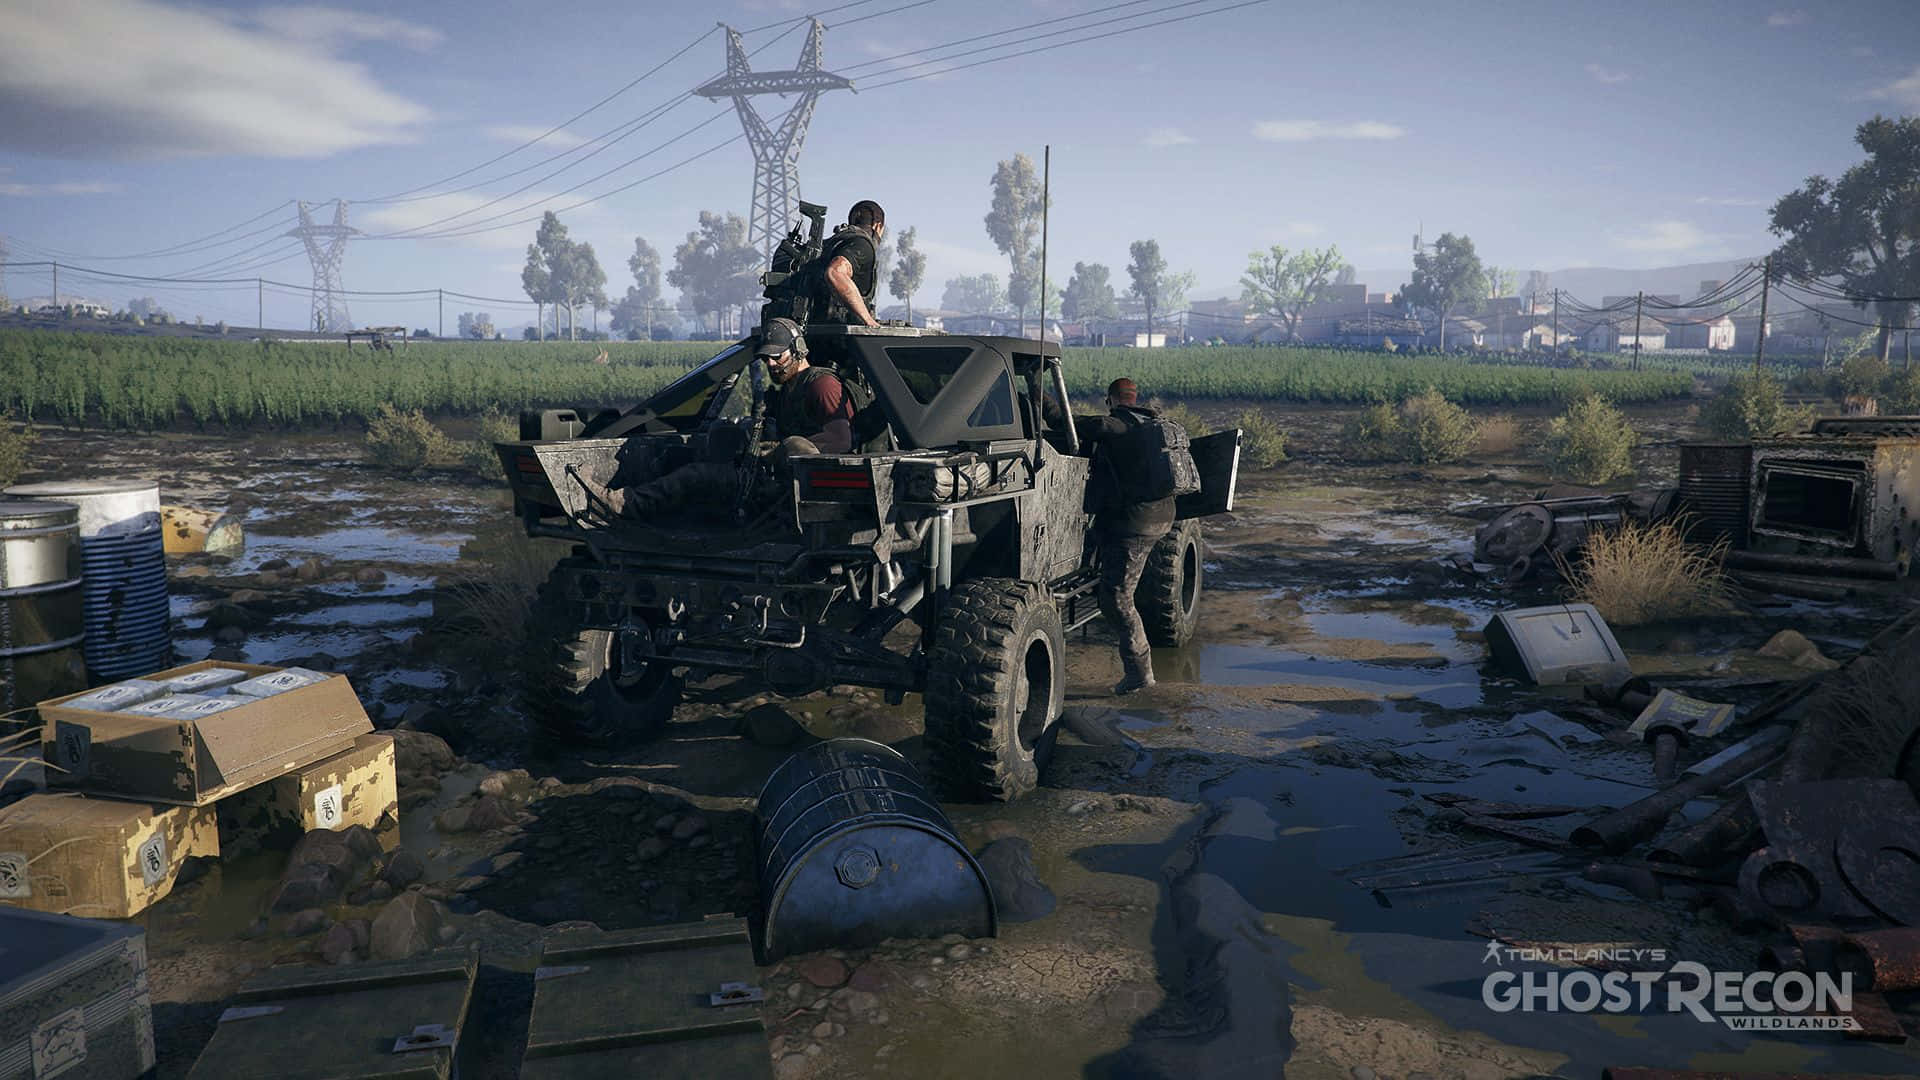 Hd Ghost Recon Wildlands Background A Buggy In A Swamp